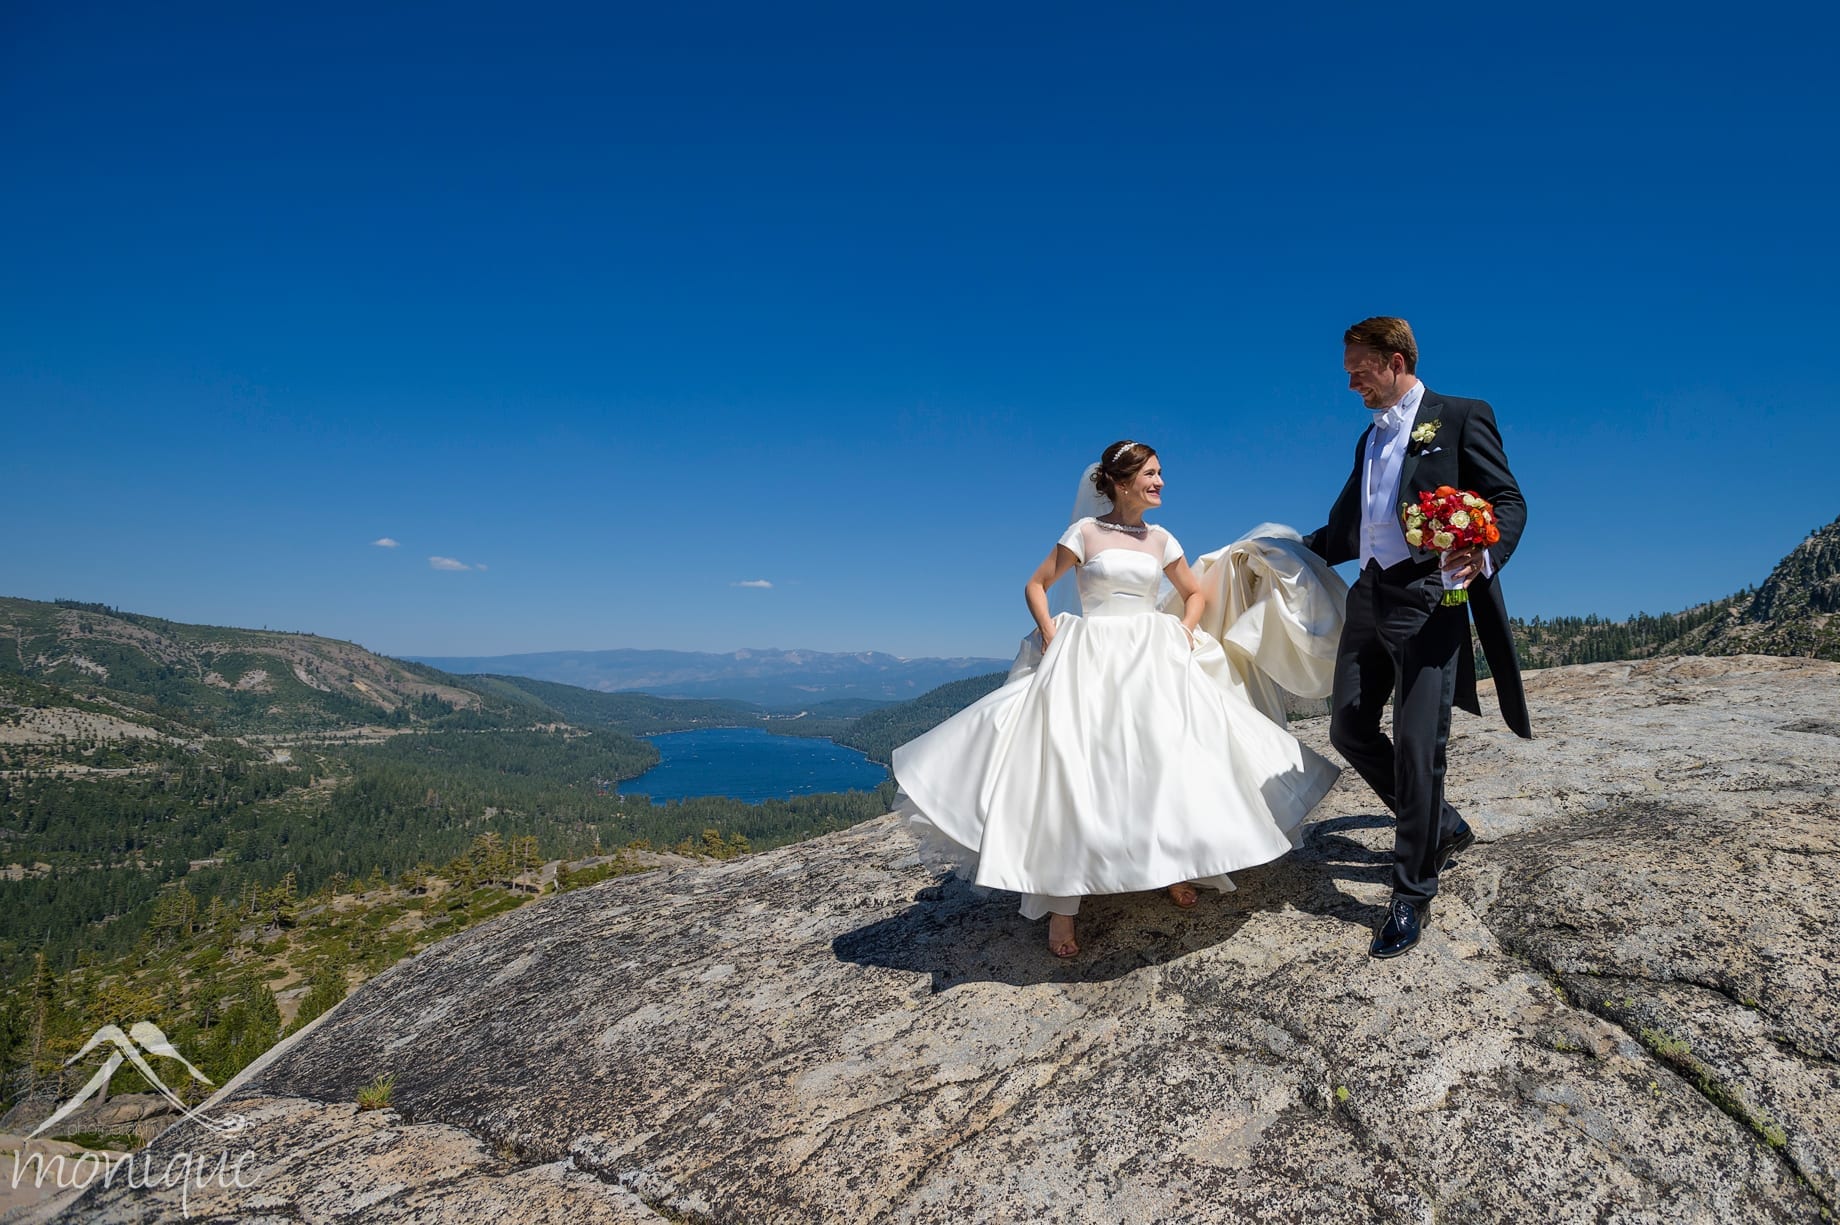 Sugar Bowl ski resort mountain top wedding in Truckee with the bride and groom overlooking Donner Lake by Photography by Monique